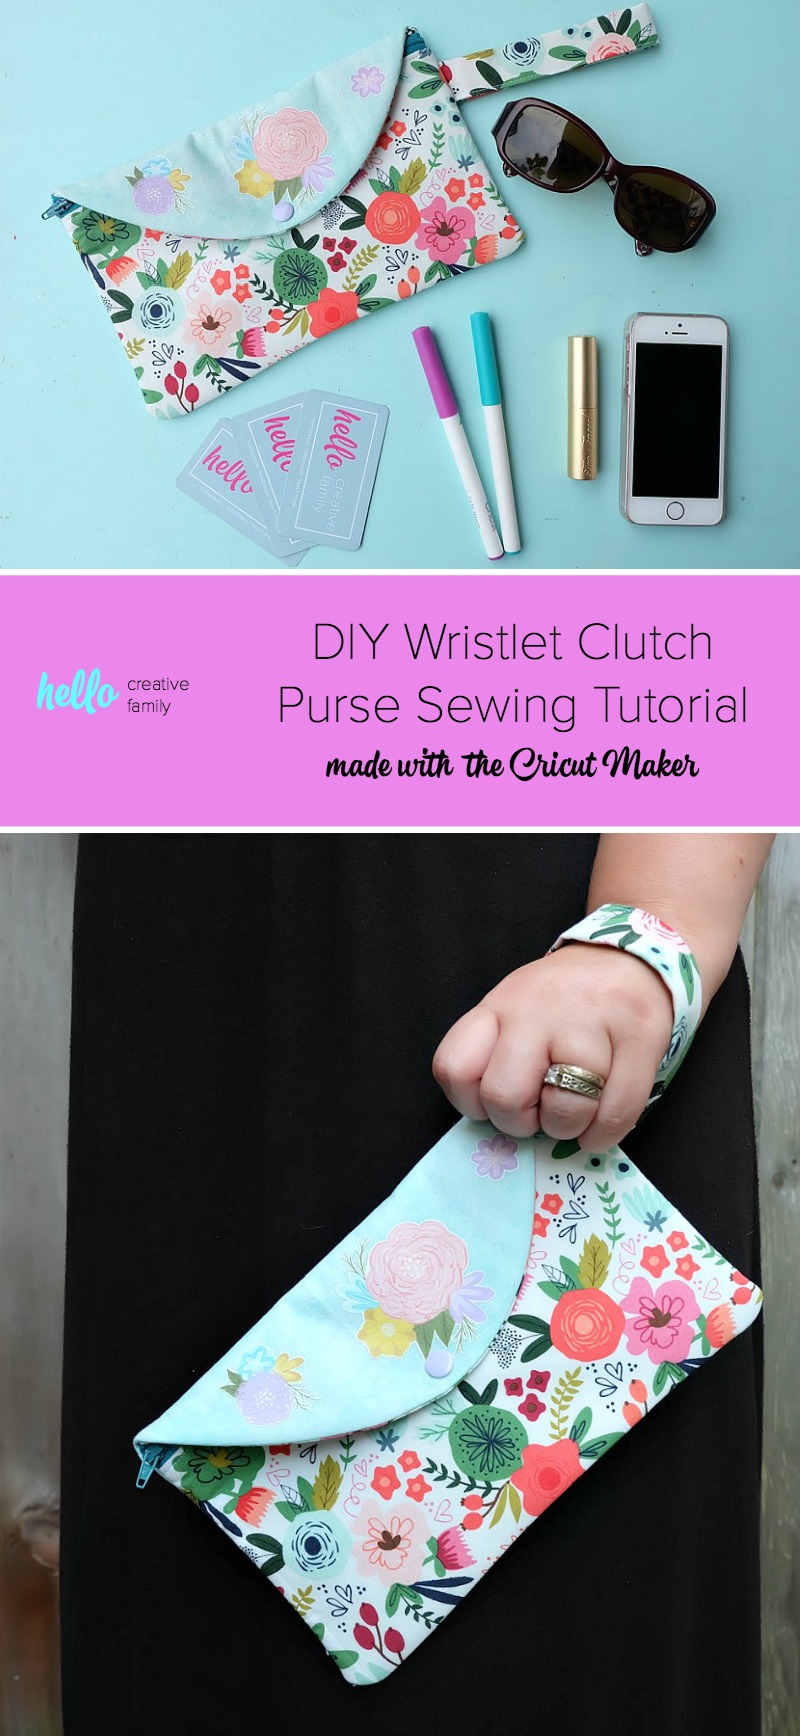 Learn how to sew an adorable DIY Wristlet Clutch Purse with this fabulous sewing tutorial with step by step photos and instructions! Every girl needs the perfect clutch, so why not make one! Fit all of your essentials into this DIY Wristlet Clutch Purse! Comes with a free cut file for making this craft project on the Cricut Maker. Make extras for handmade gift ideas for the women in your life! #Cricut #CricutMade #sewing #crafts